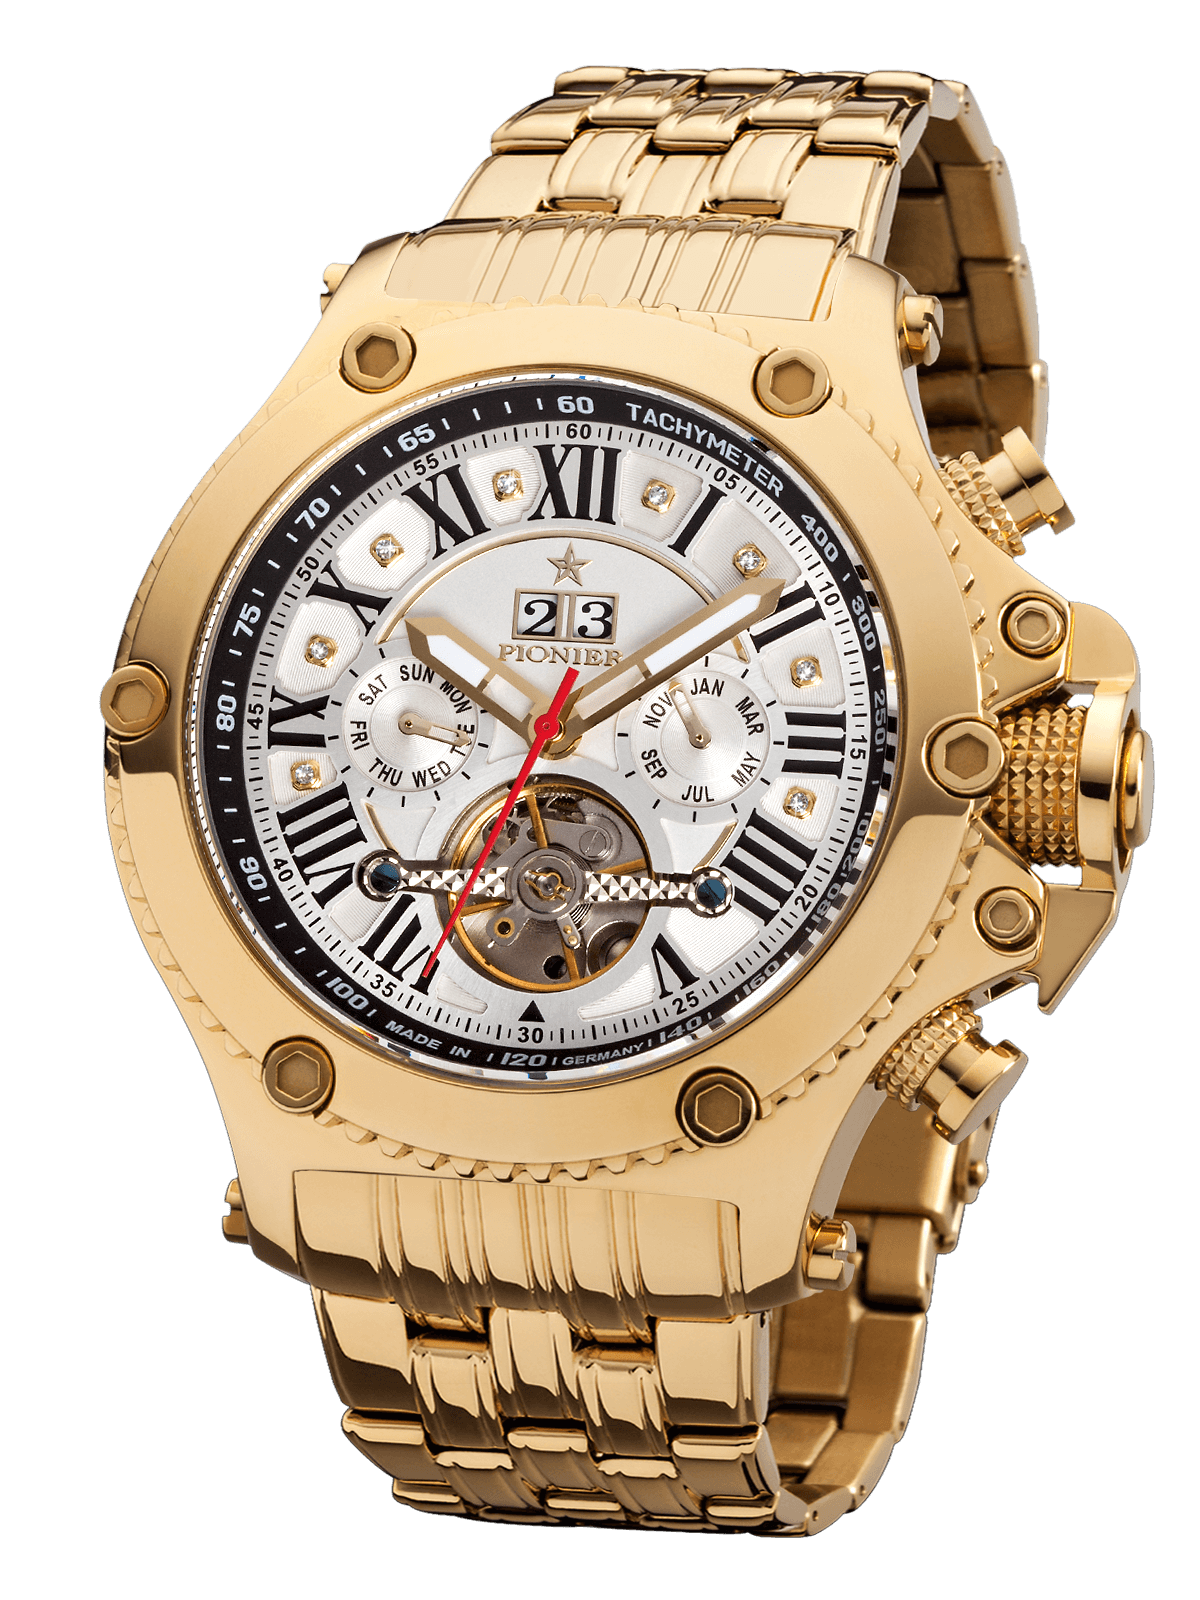 New York Pionier GM-511-10 white dial with diamonds and Roman numerals with gold case and stainless steel band.